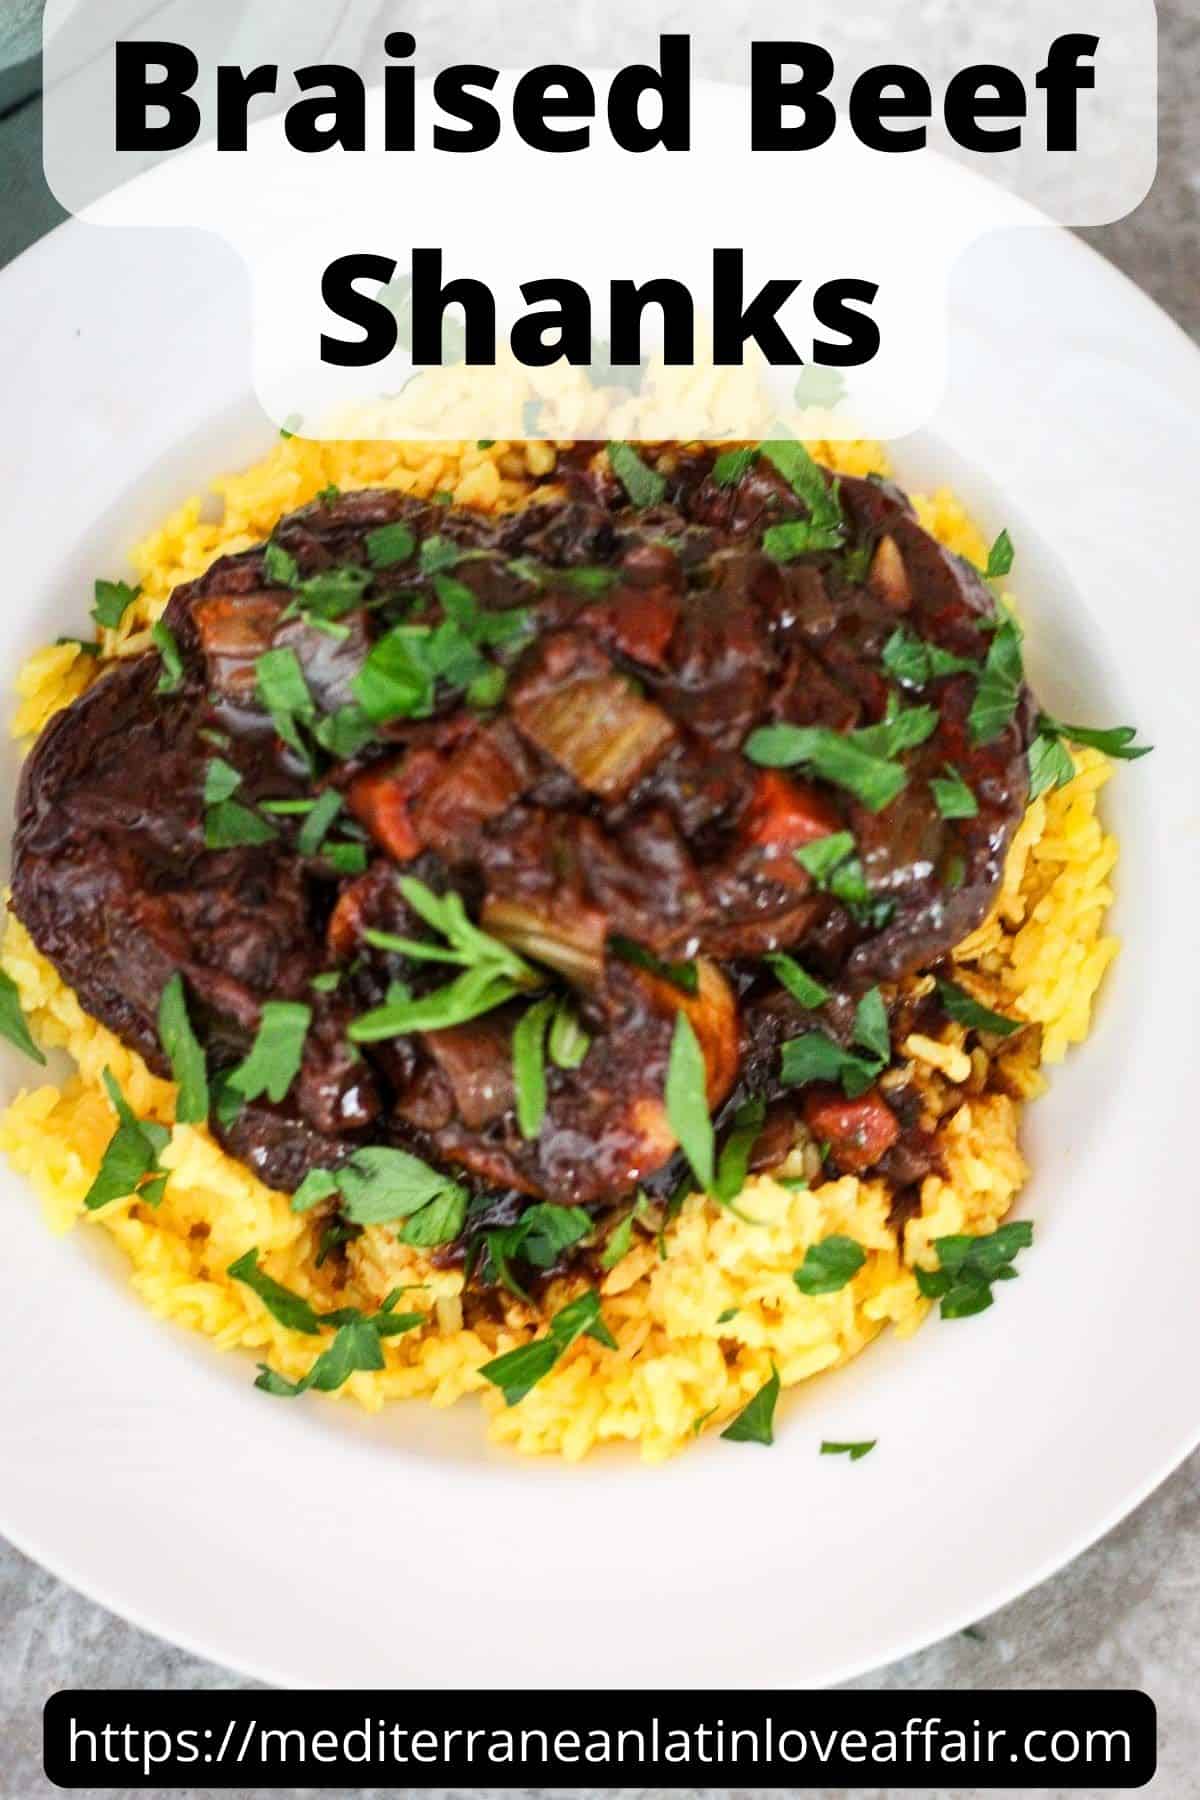 An image prepared for Pinterest. It shows a plate with yellow rice and beef shanks, garnished with greens. There's a title bar that reads Braised Beef Shanks and at the bottom there's the website link.